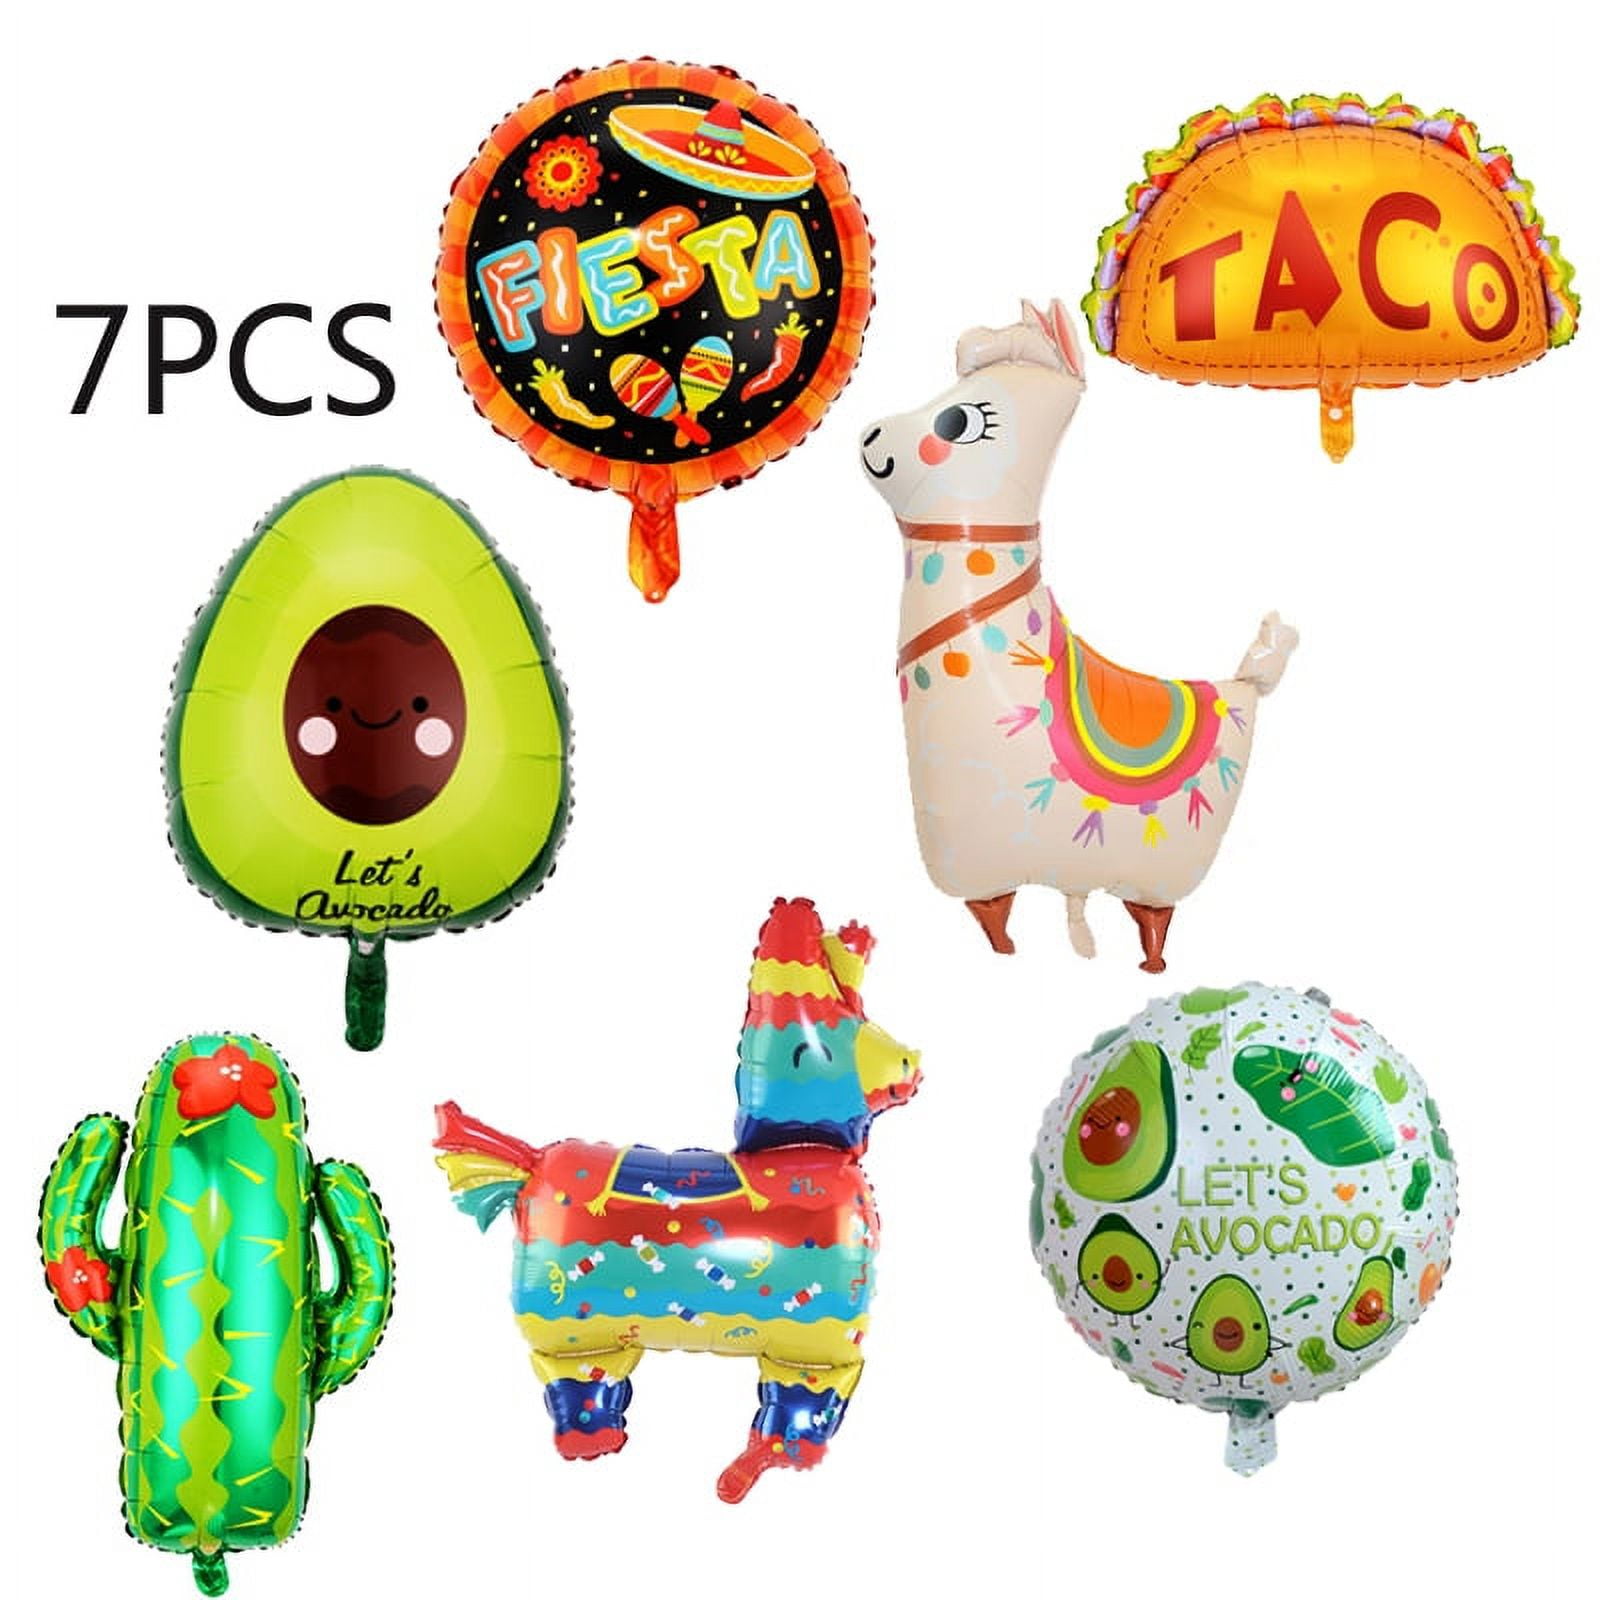 Fiesta Party Decorations 50 Pcs Mexican Themed Party Decorations, Mexico  Llama, Cactus, Taco, Balloons, Paper Fans, Balloons, Paper Fans, Pom Pom